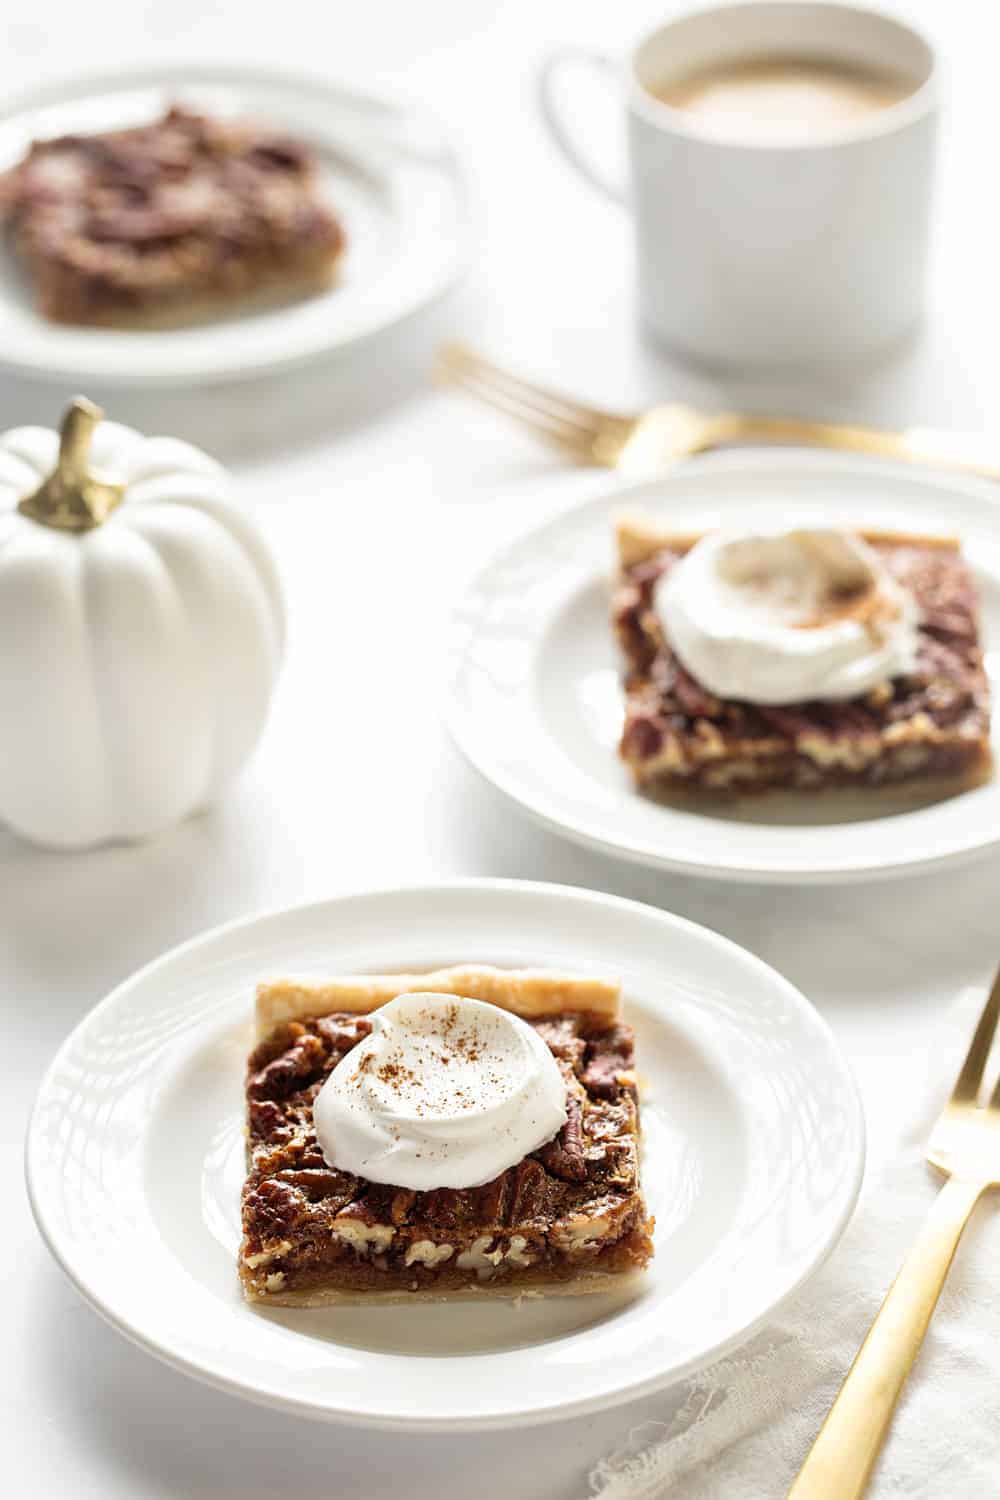 Pecan Slab Pie is the perfect dessert to feed a Thanksgiving crowd. It comes together in less than 20 minutes!